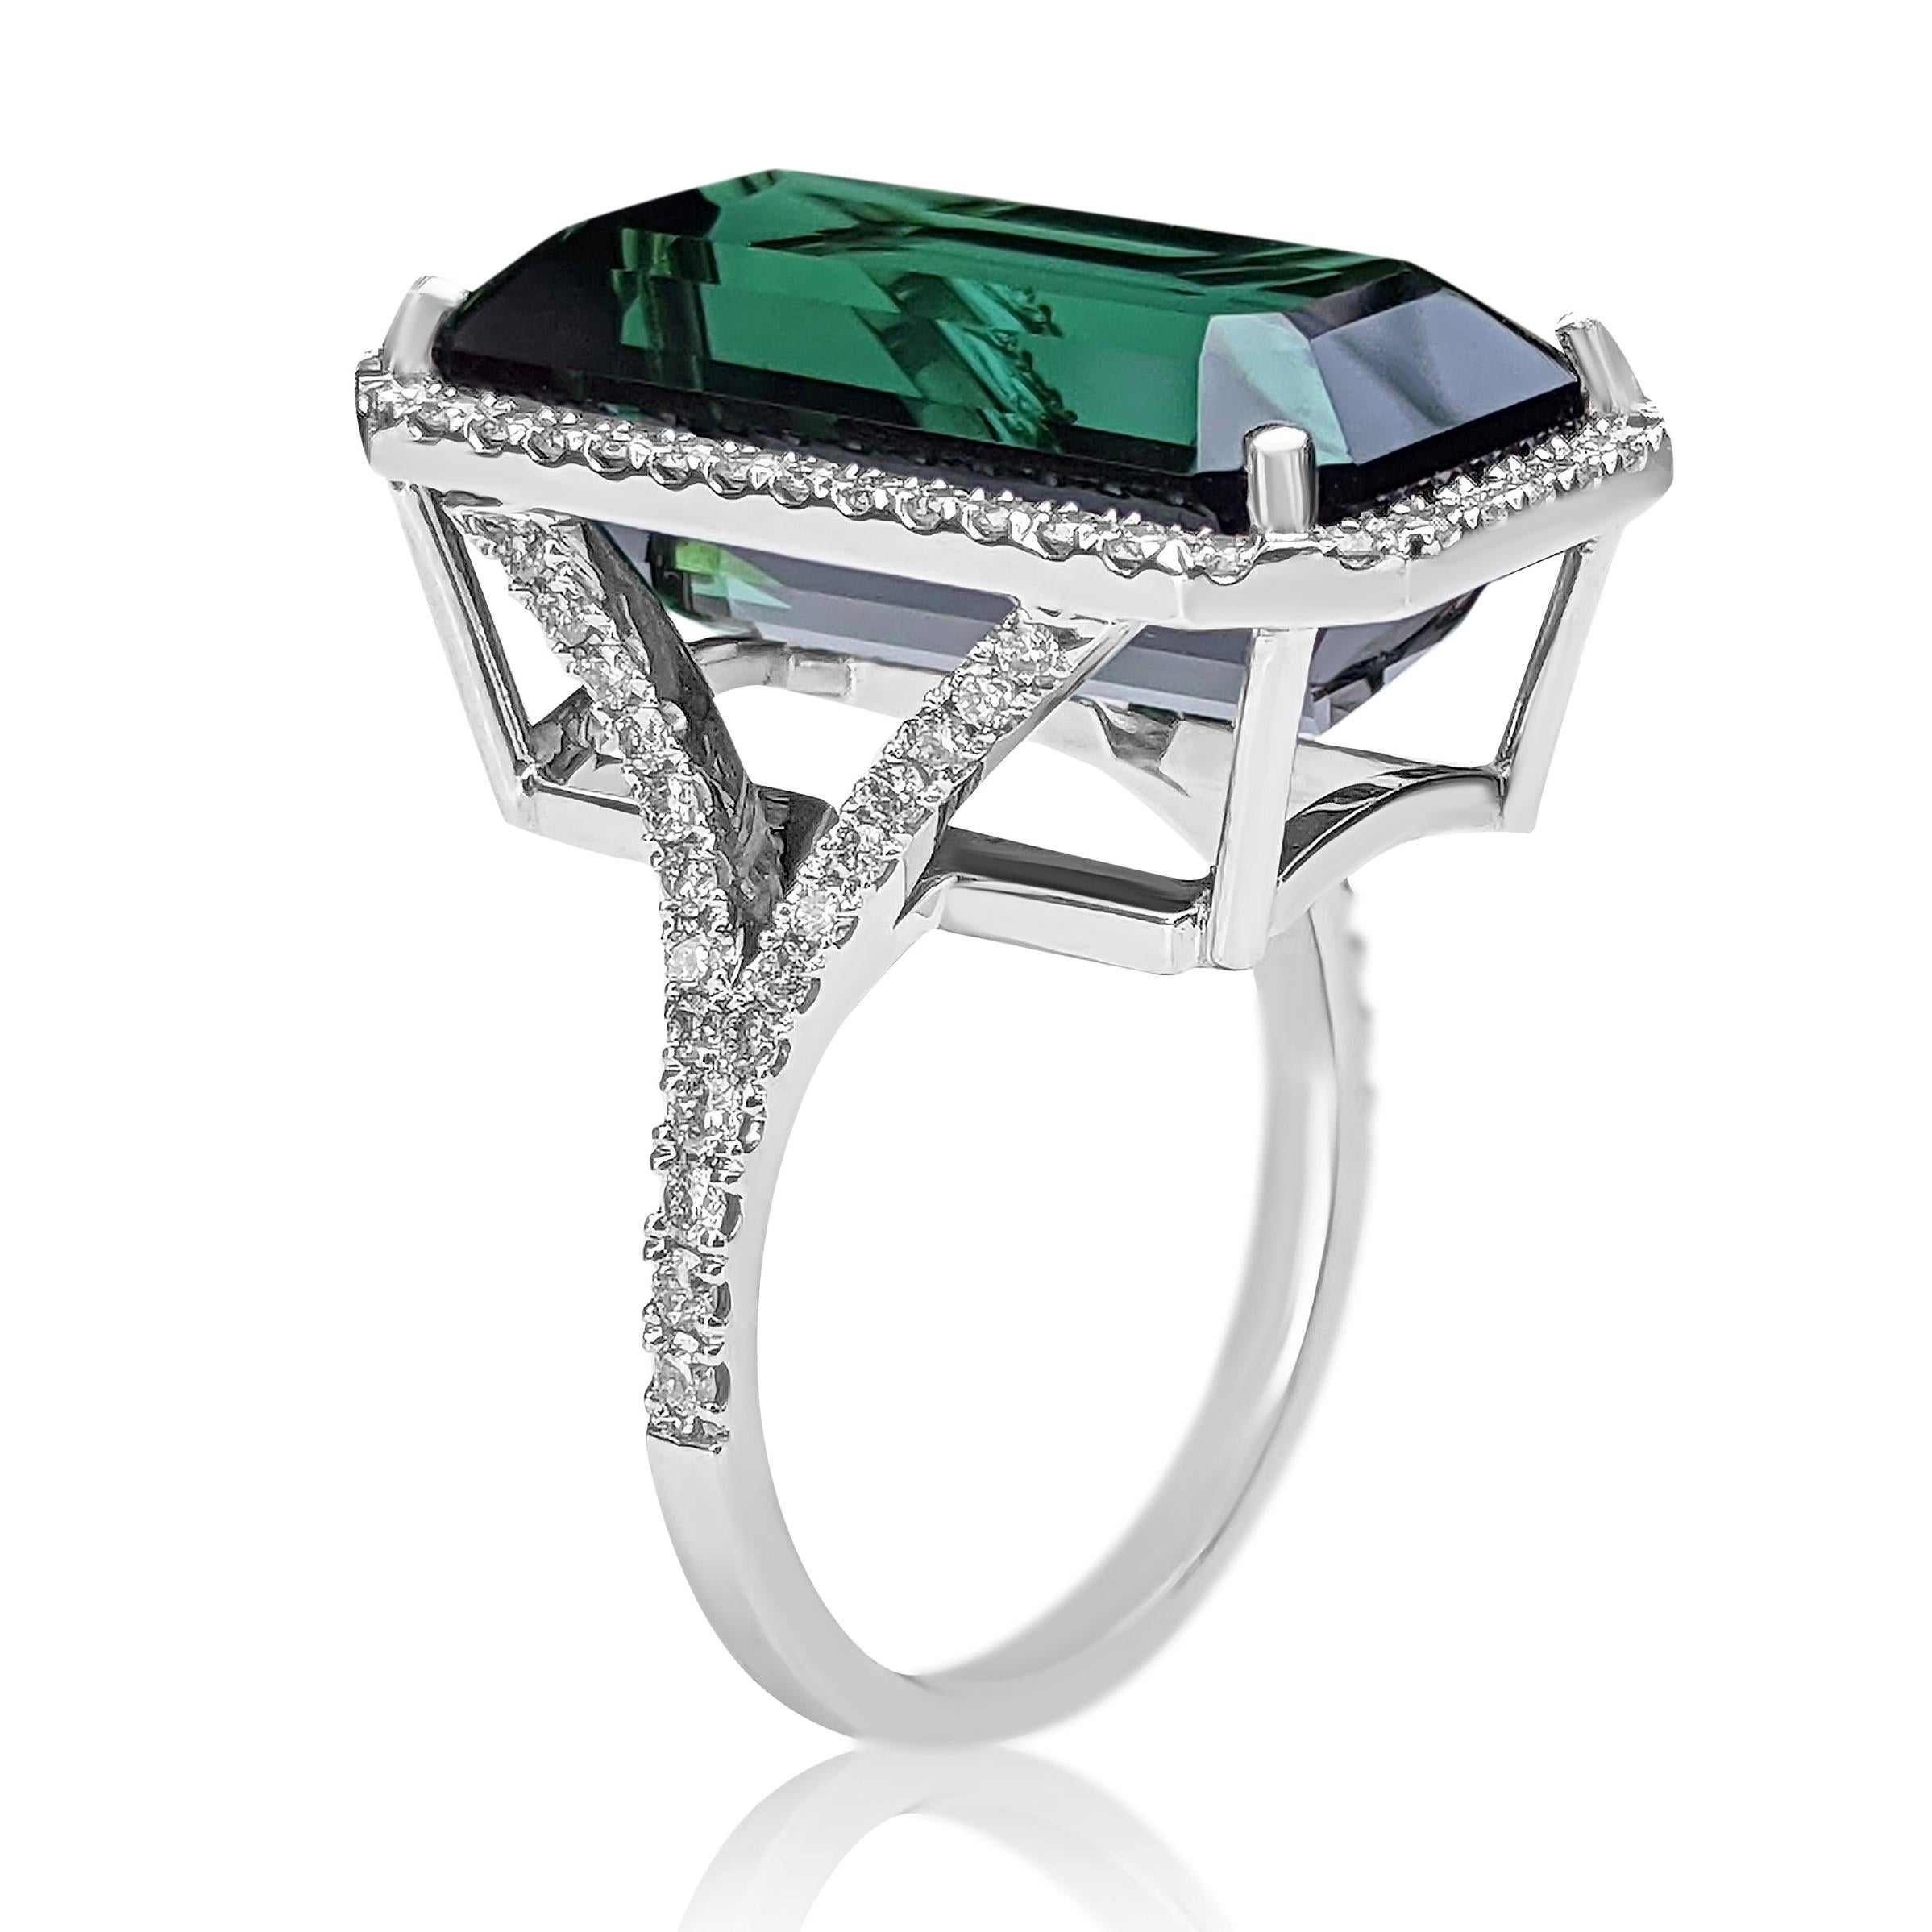 Ring can be sized free of charge prior to shipping out.

Center Stone:
___________
Natural Tourmaline
Cut: Cut Cornered Rectangle Step Cut
Carat: 16.97 ct
Color: Green

Side Stones:
___________
Natural Diamonds
Cut: Round 
Carat: 1.00 tccw
Color: